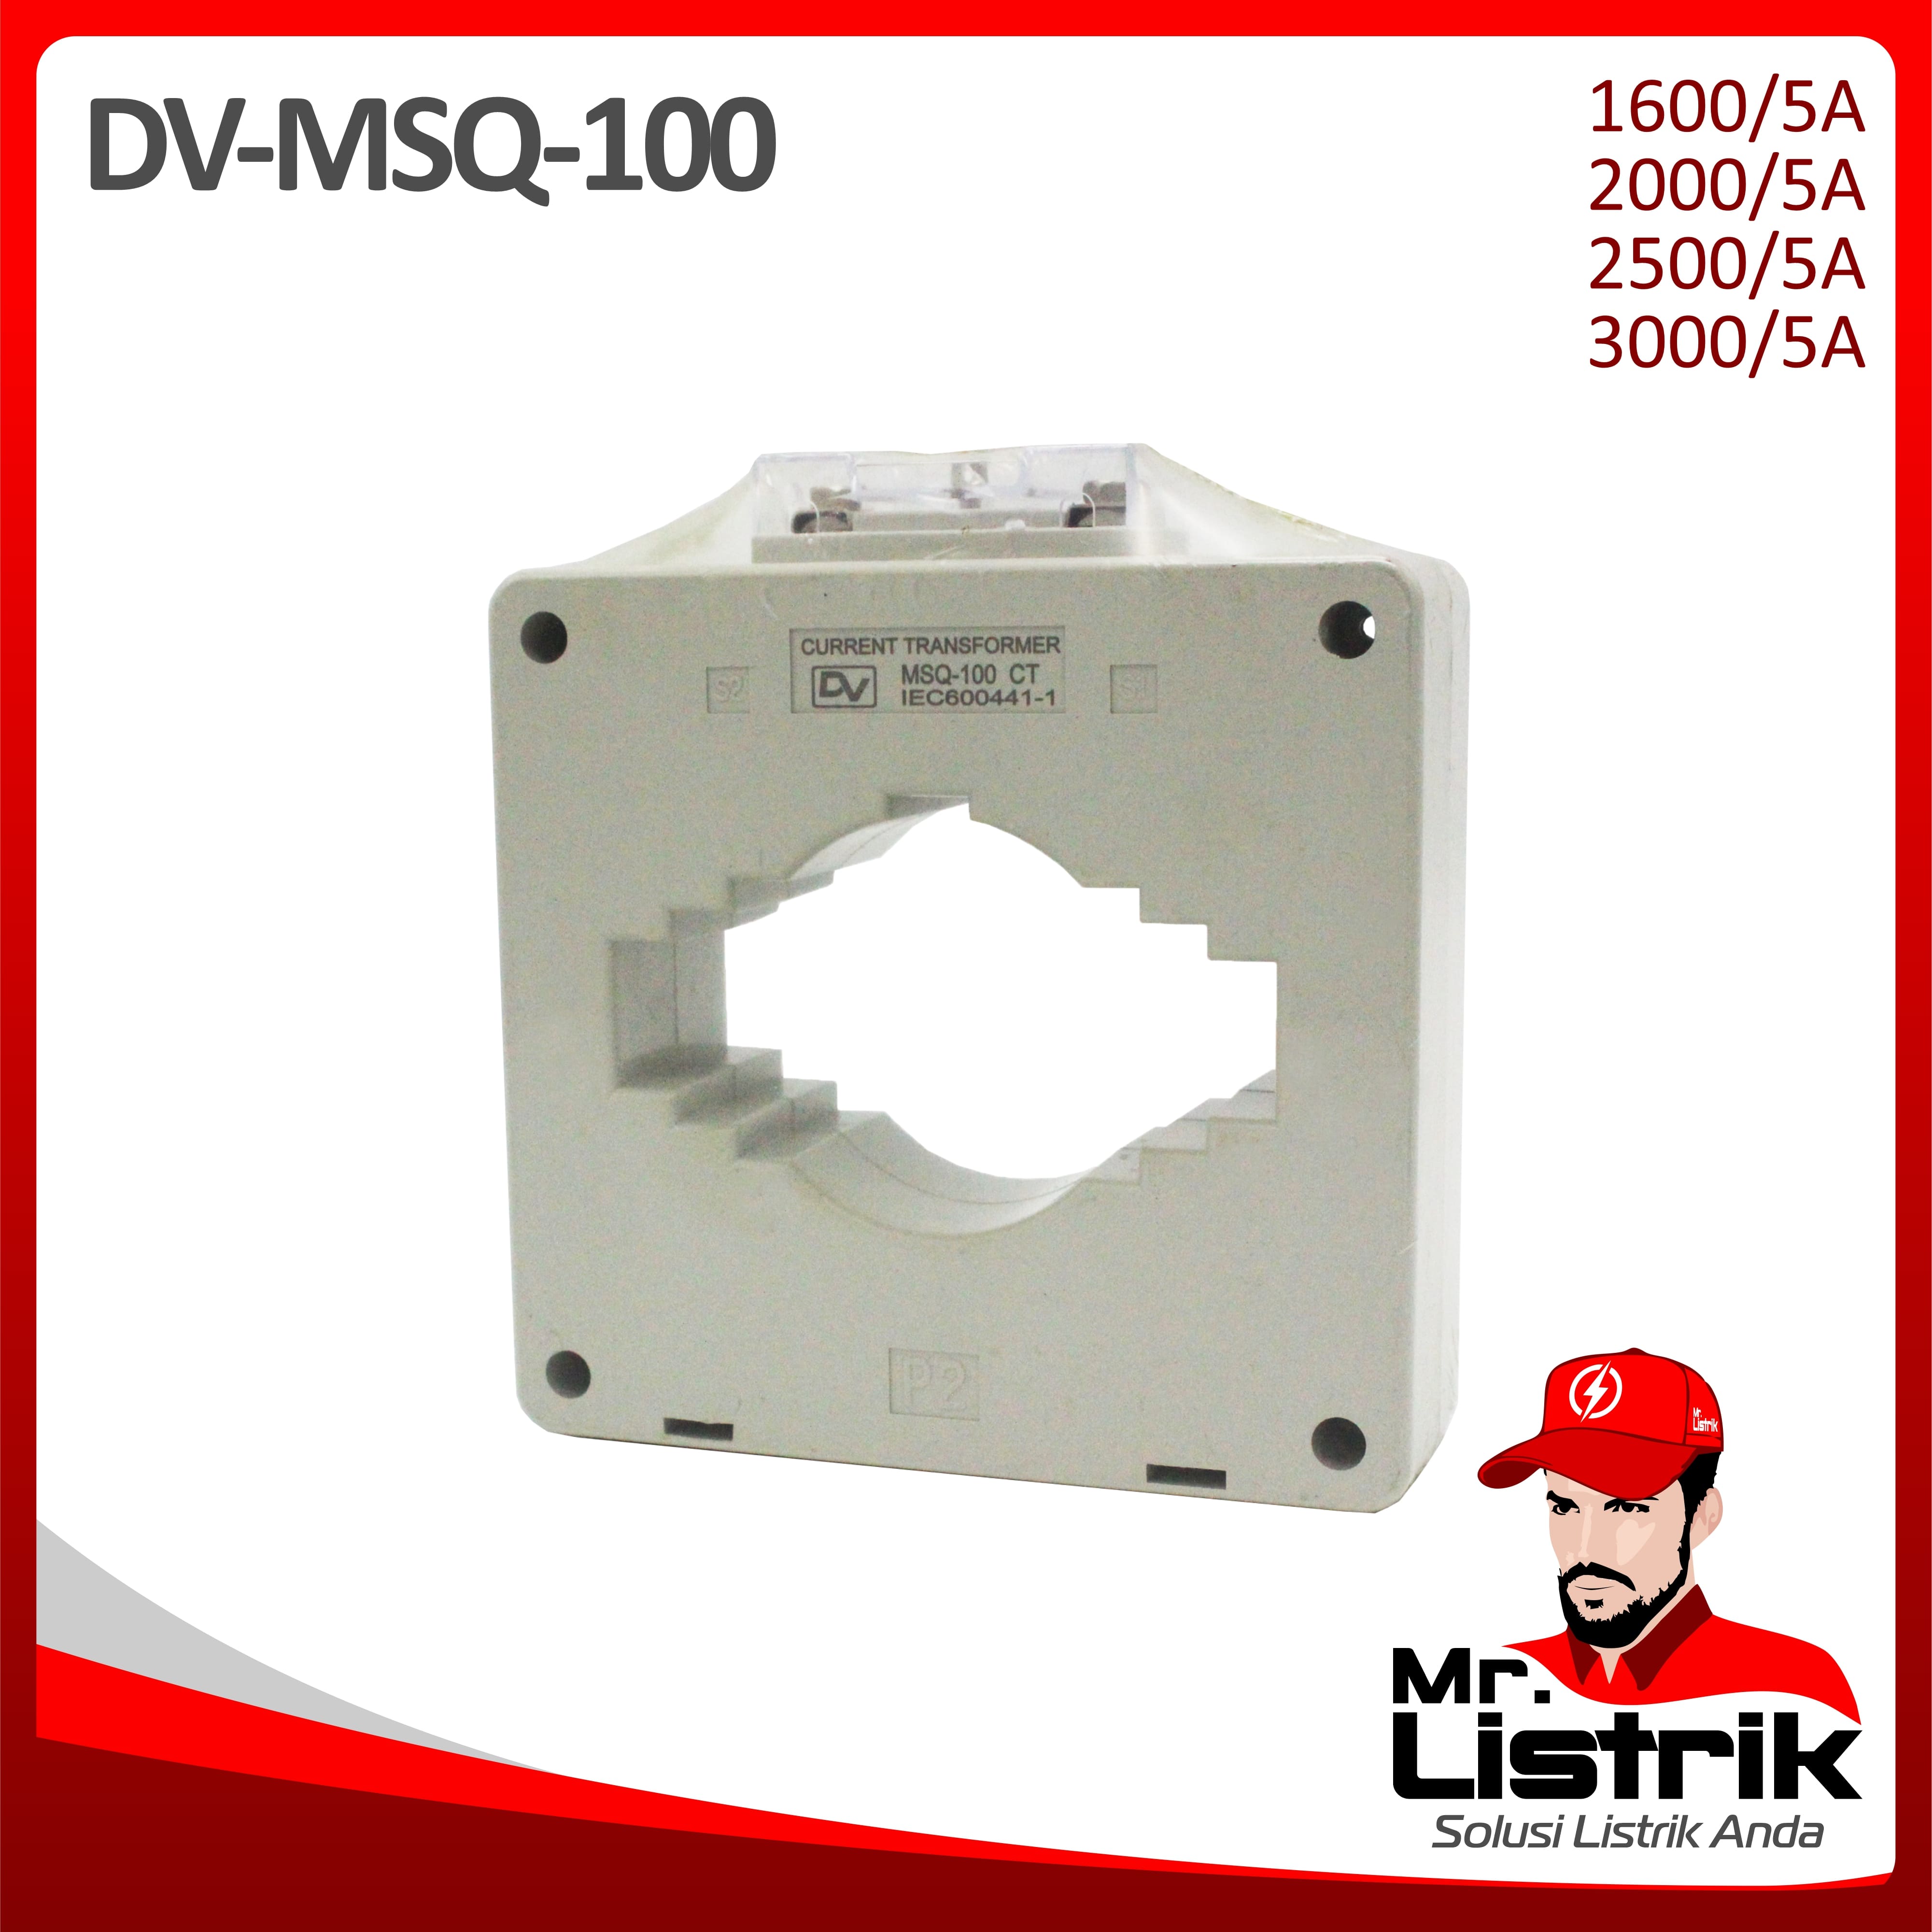 Current Transformer DV Fixed Type MSQ-100 1600/5A